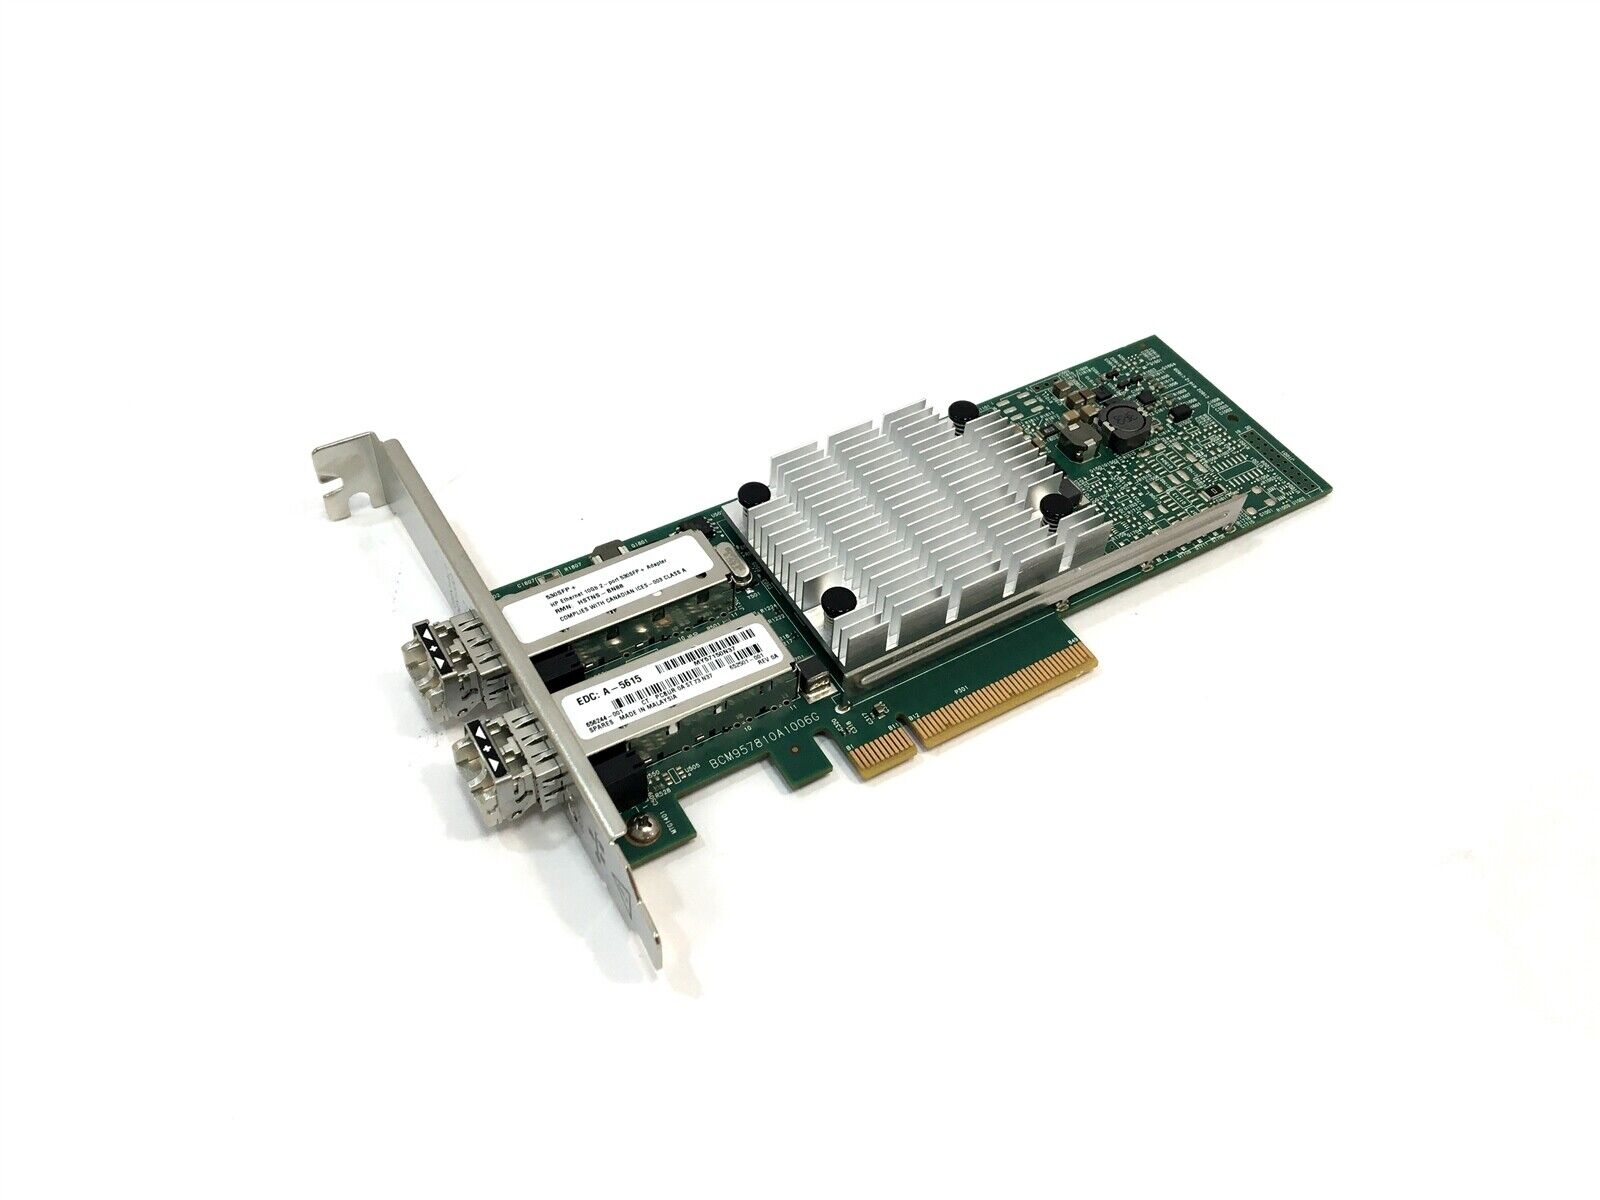 HP 530SFP+ 10Gb Dual Port PCIe Ethernet Adapter Card 656244-001 w/ (2) SFPs